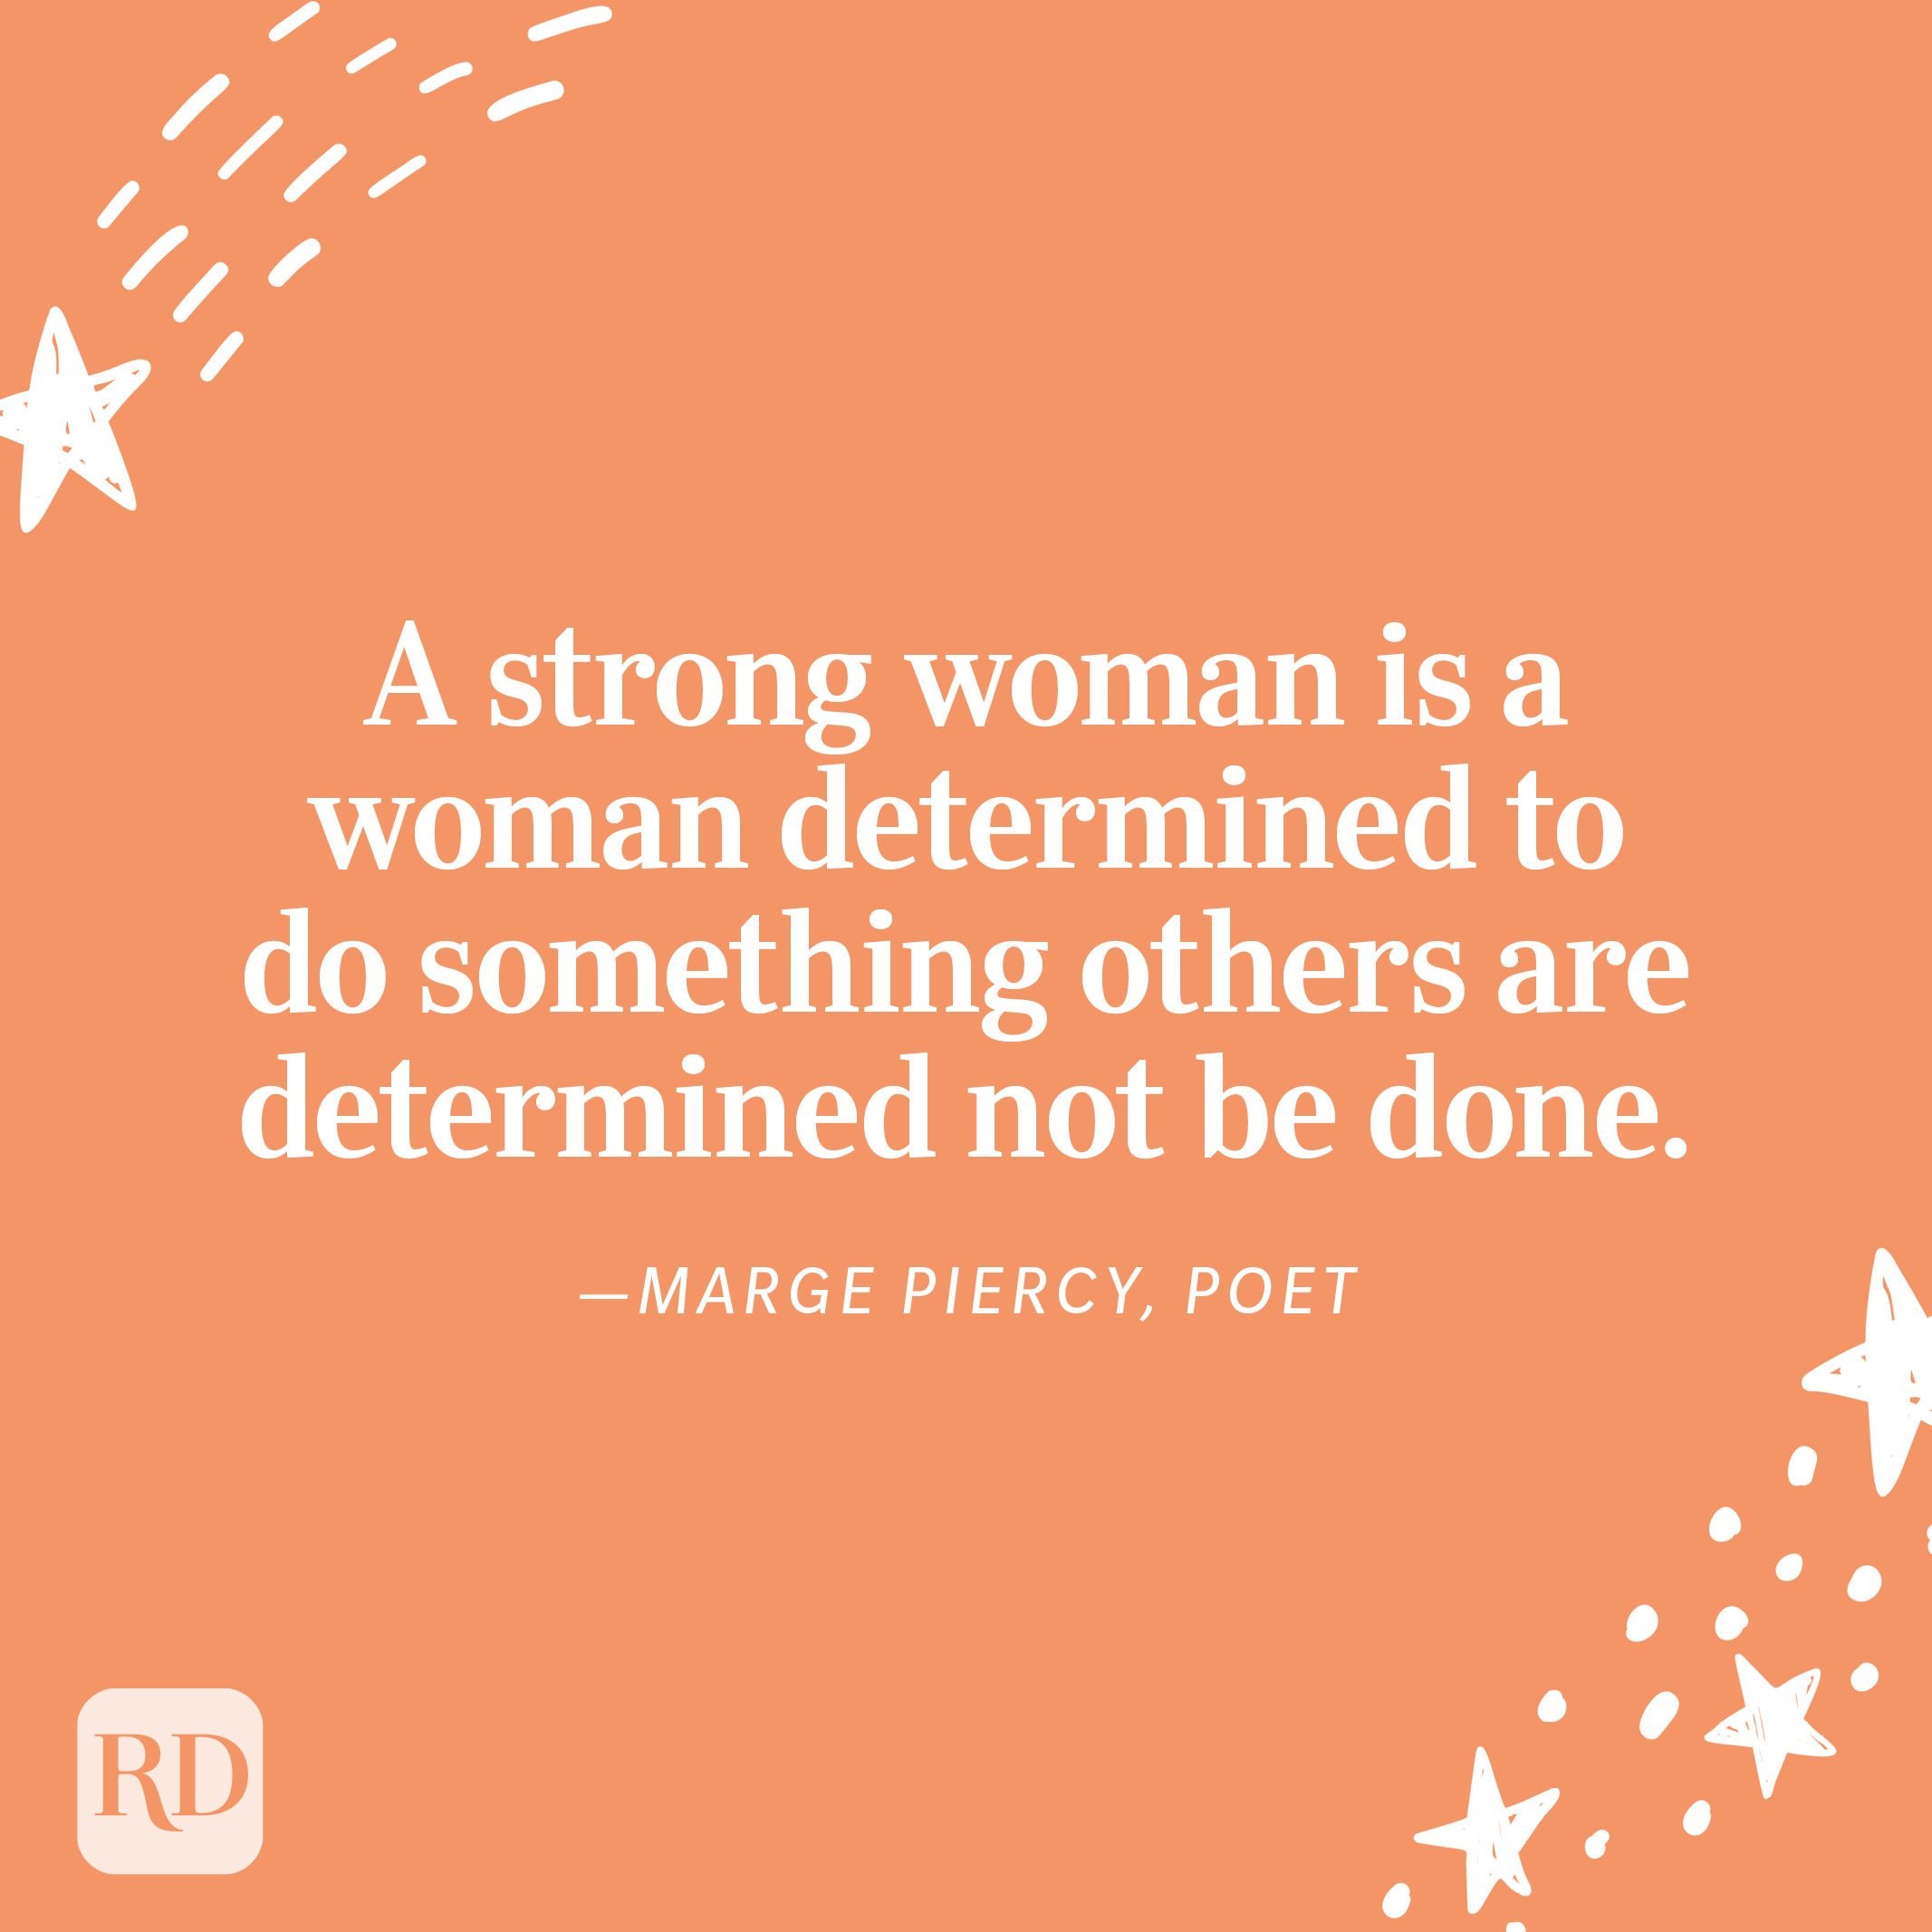 15 People Explain What It Means To Be A Strong Woman